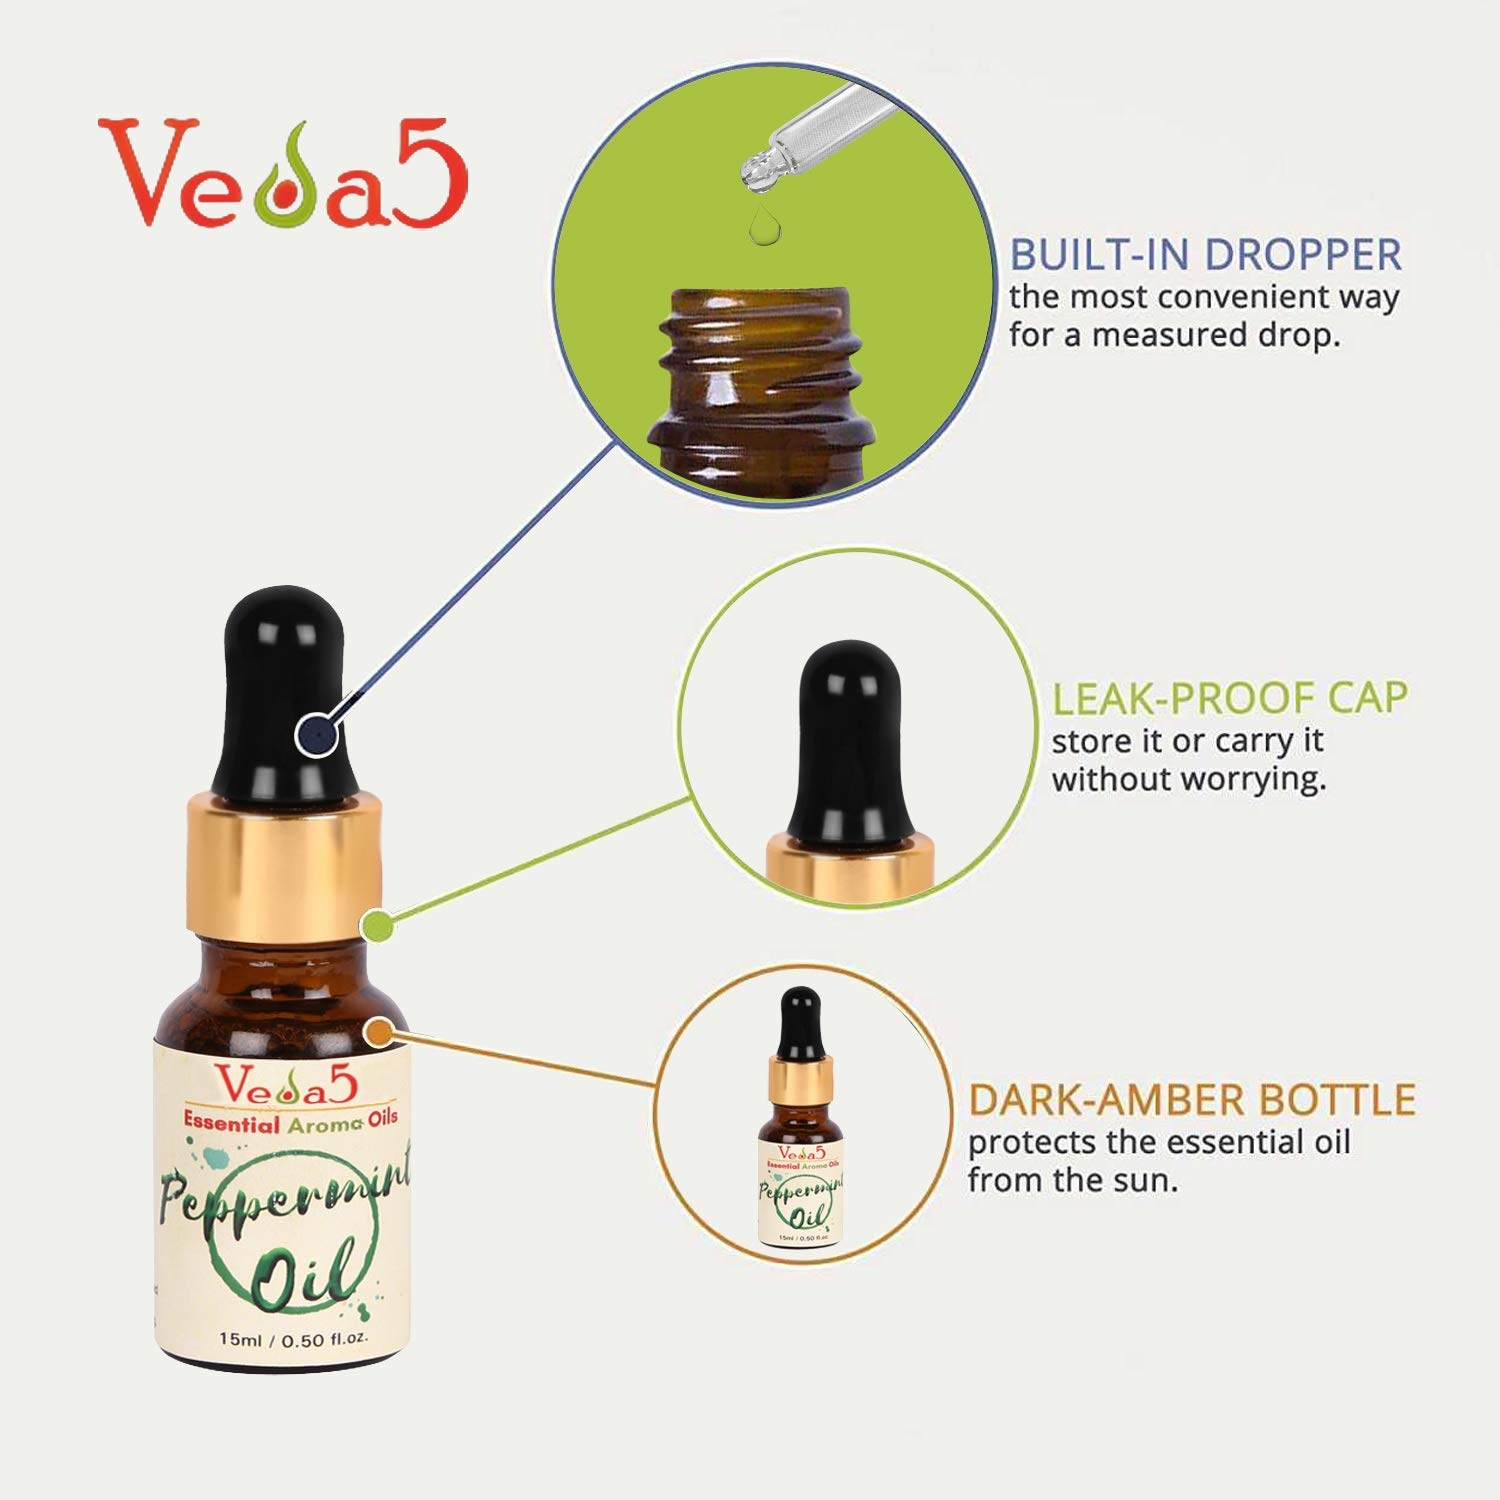 Peppermint Oil 3 Veda5 Himalayan Naturals